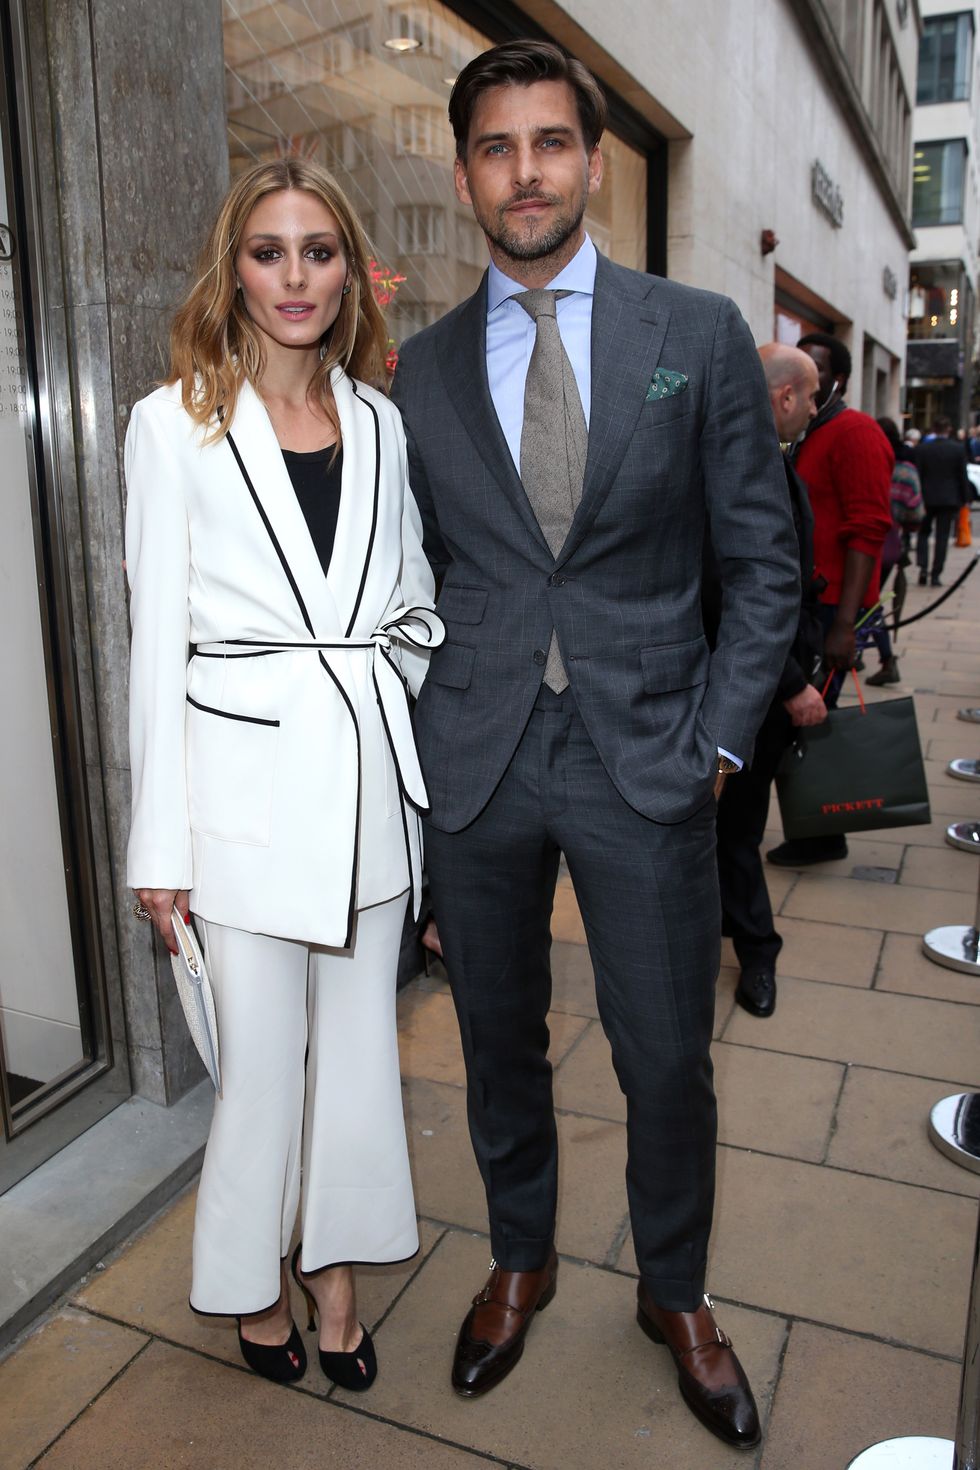 Olivia Palermo and Johannes Huebl at the Rimowa store launch in London this week